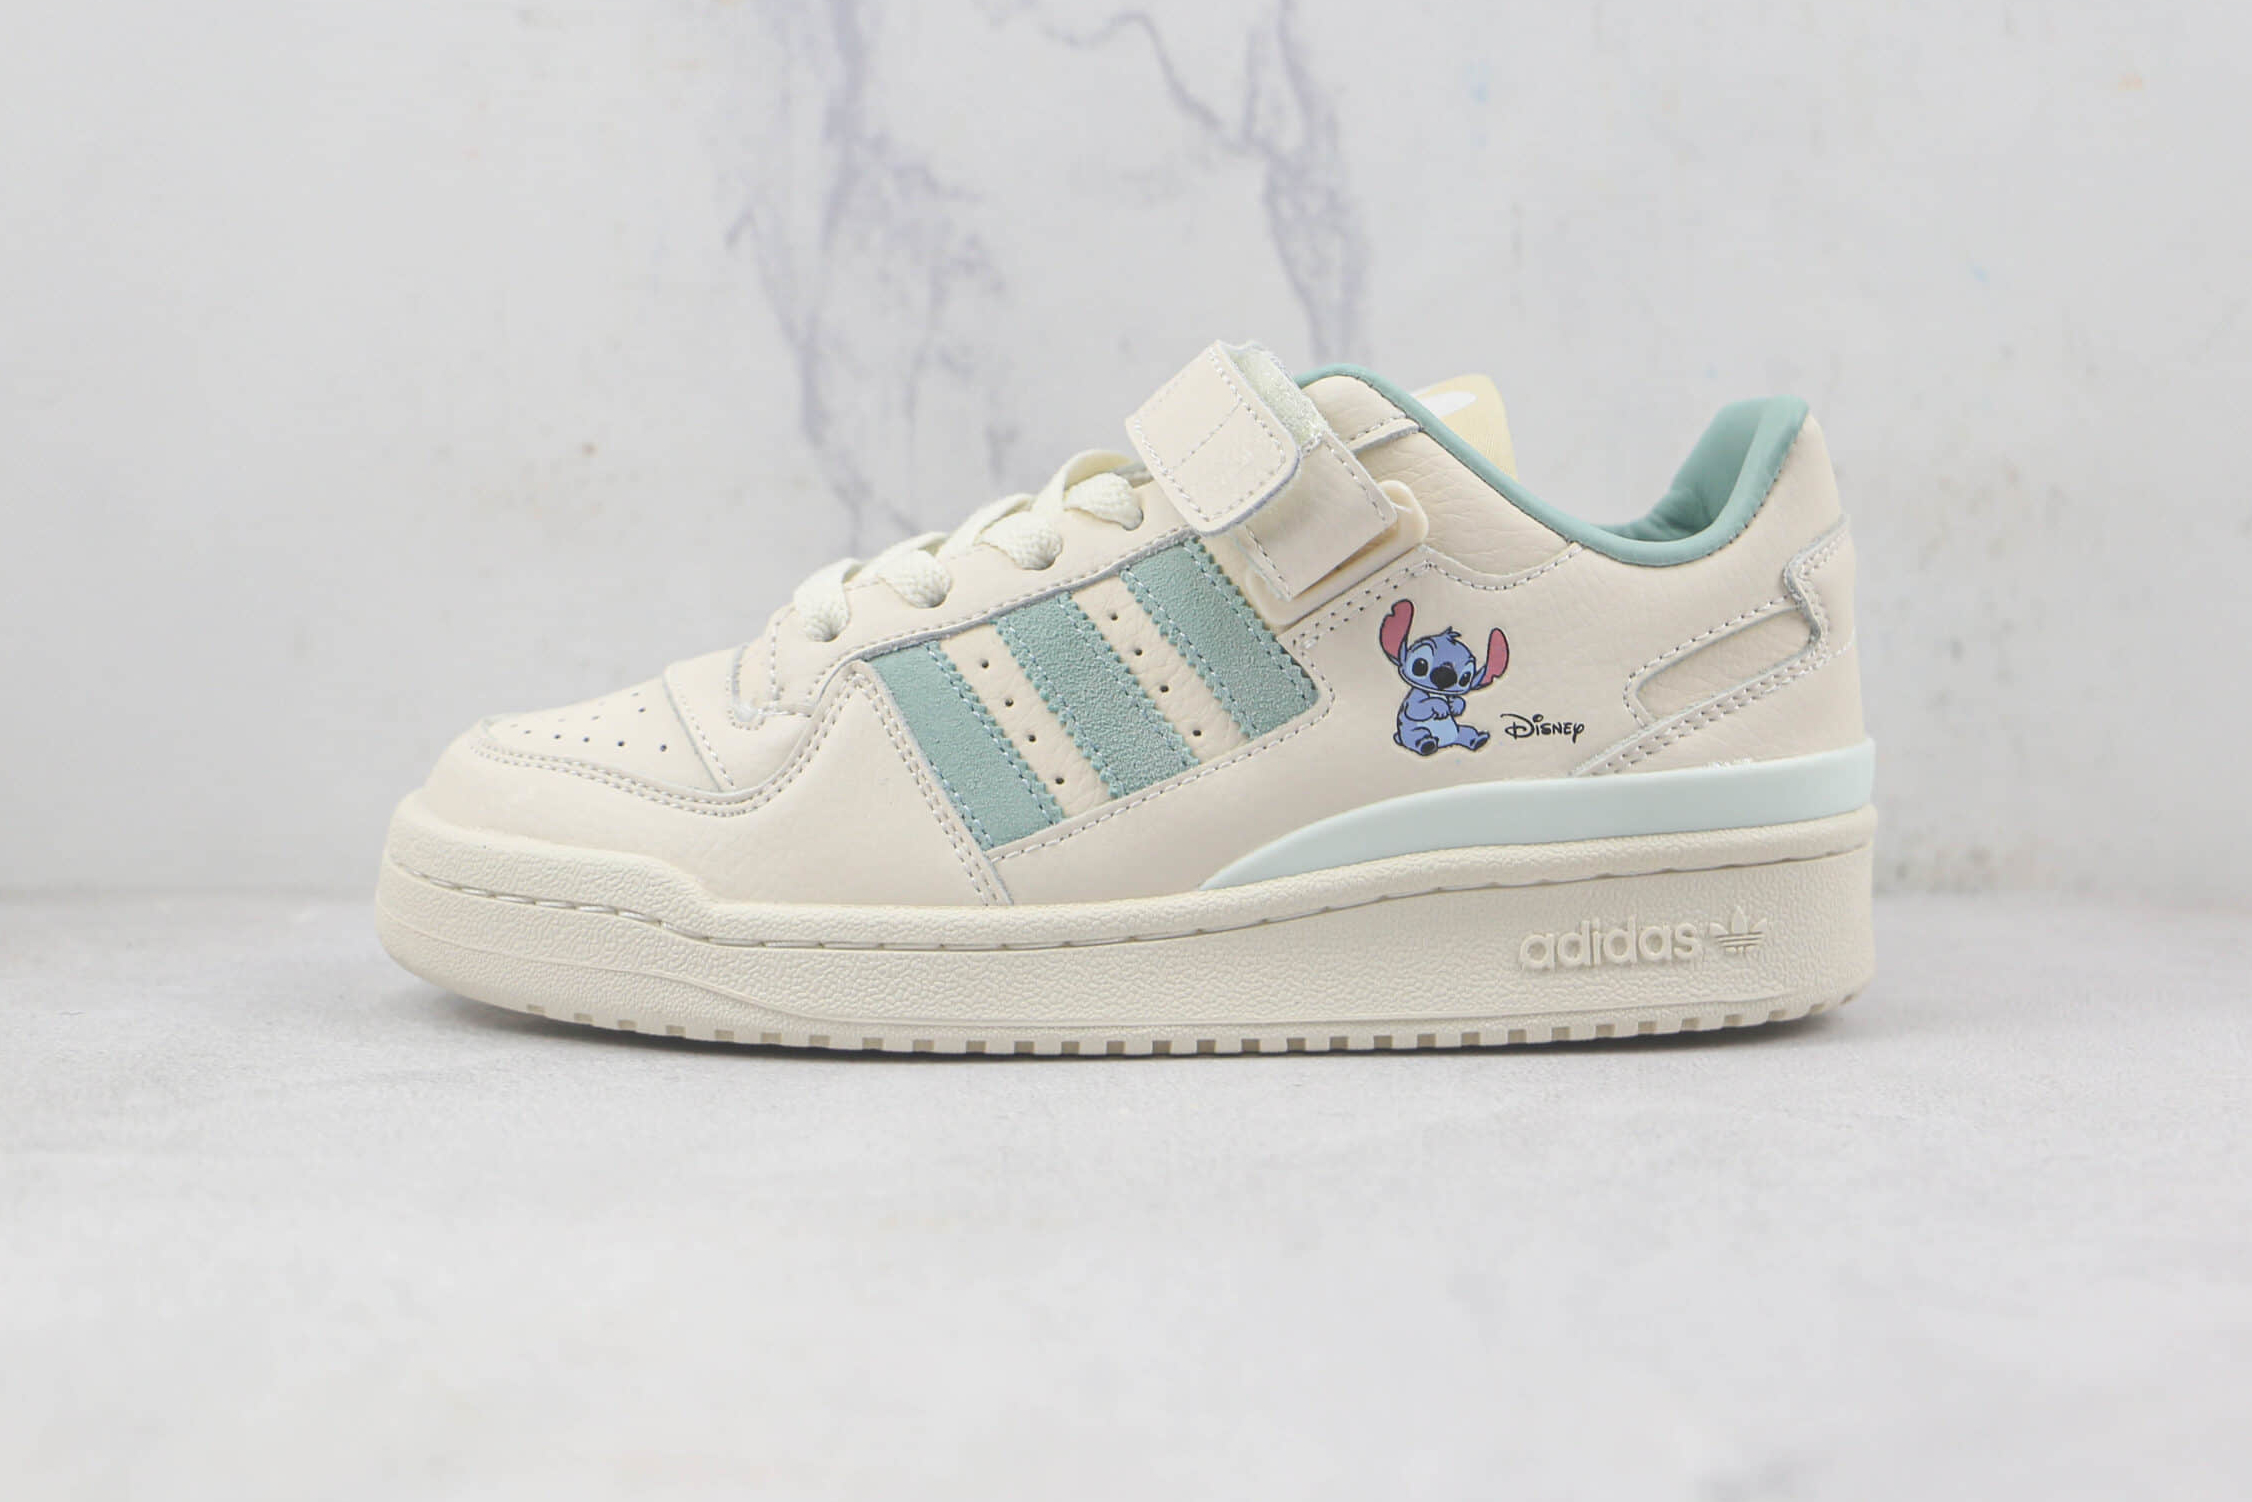 Disney x Adidas Originals Forum Low HQ6374 - Shop Now for Limited Edition Collaboration Sneakers!